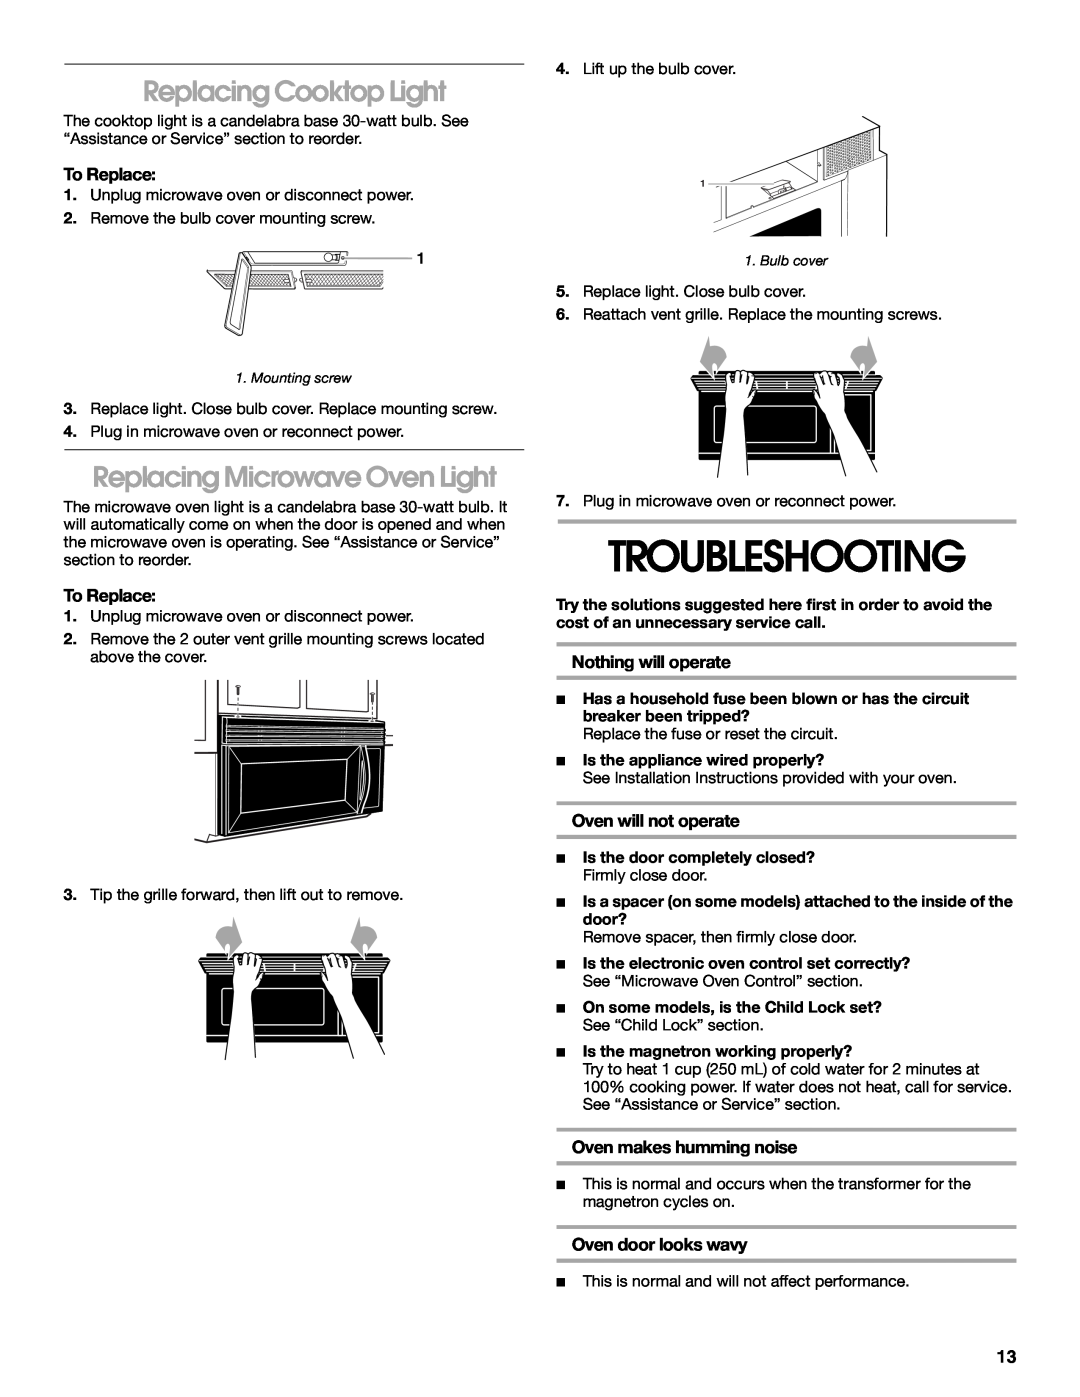 Whirlpool TMH14XM manual Troubleshooting, Replacing Cooktop Light, Replacing Microwave Oven Light 